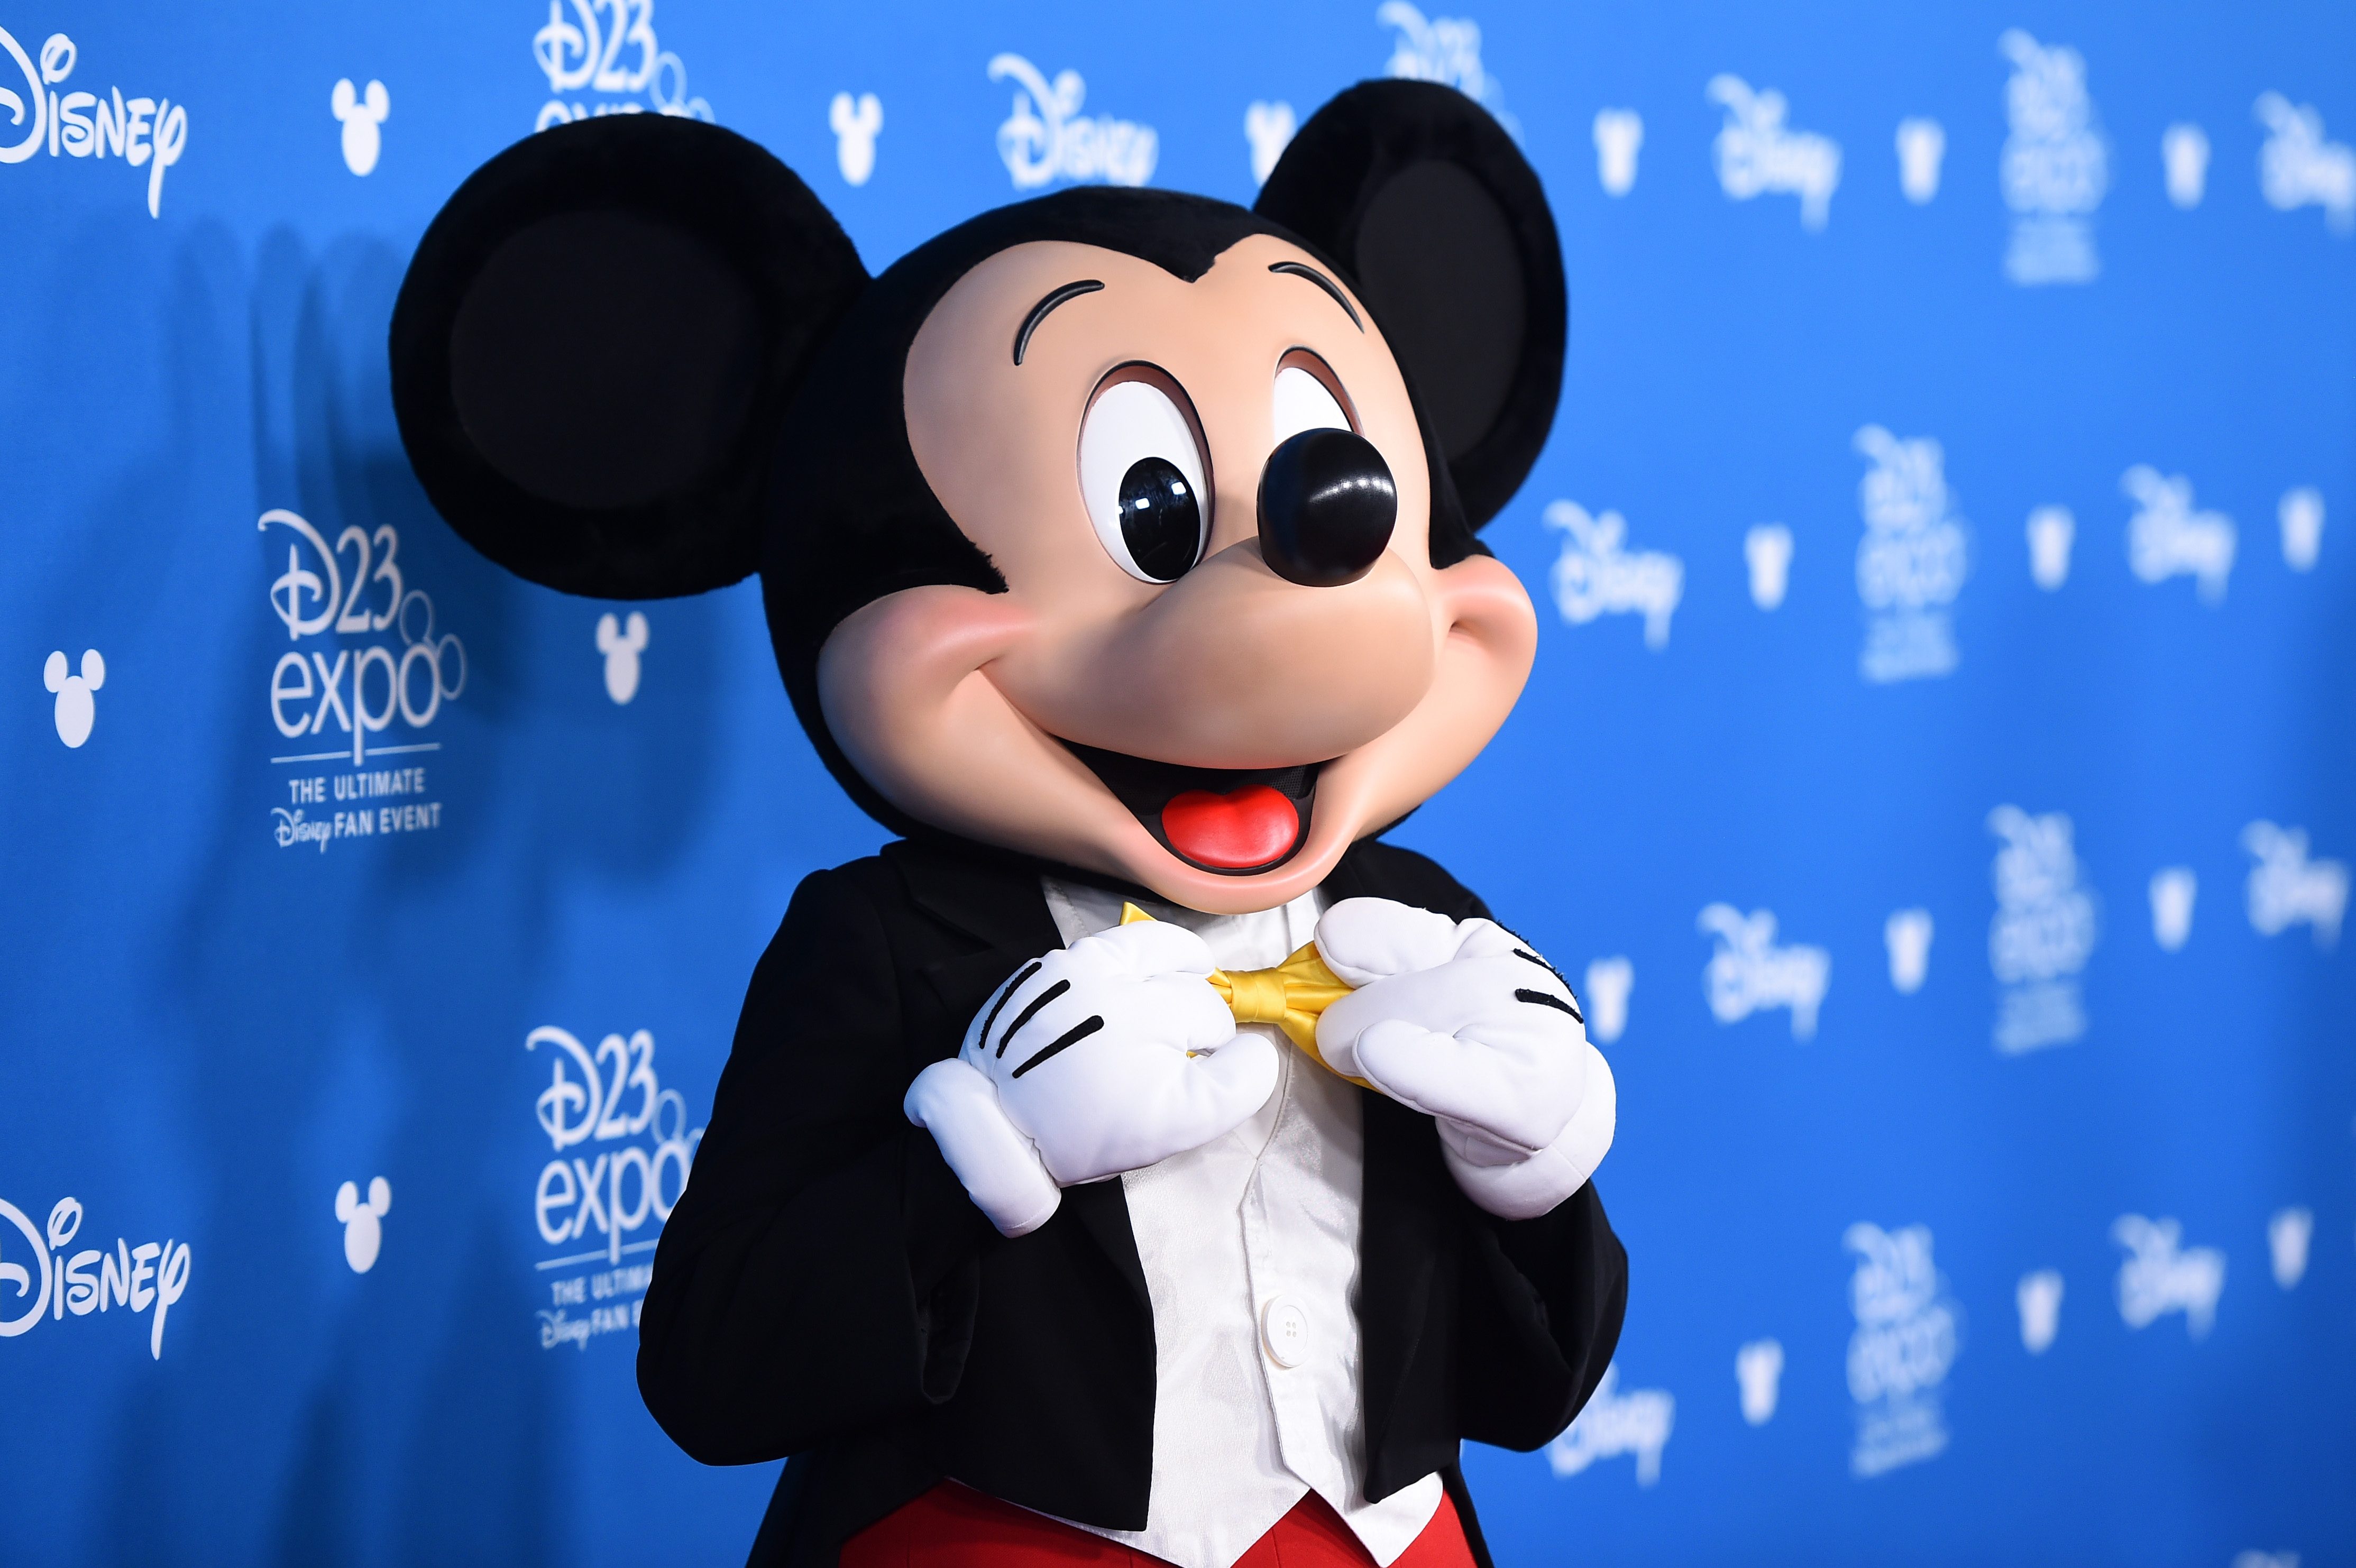 Mandatory Credit: Photo by Michael Buckner/Variety/Shutterstock (10369379cr) Mickey Mouse Disney Legends Ceremony, Arrivals, D23 Expo, Anaheim, USA - 23 Aug 2019